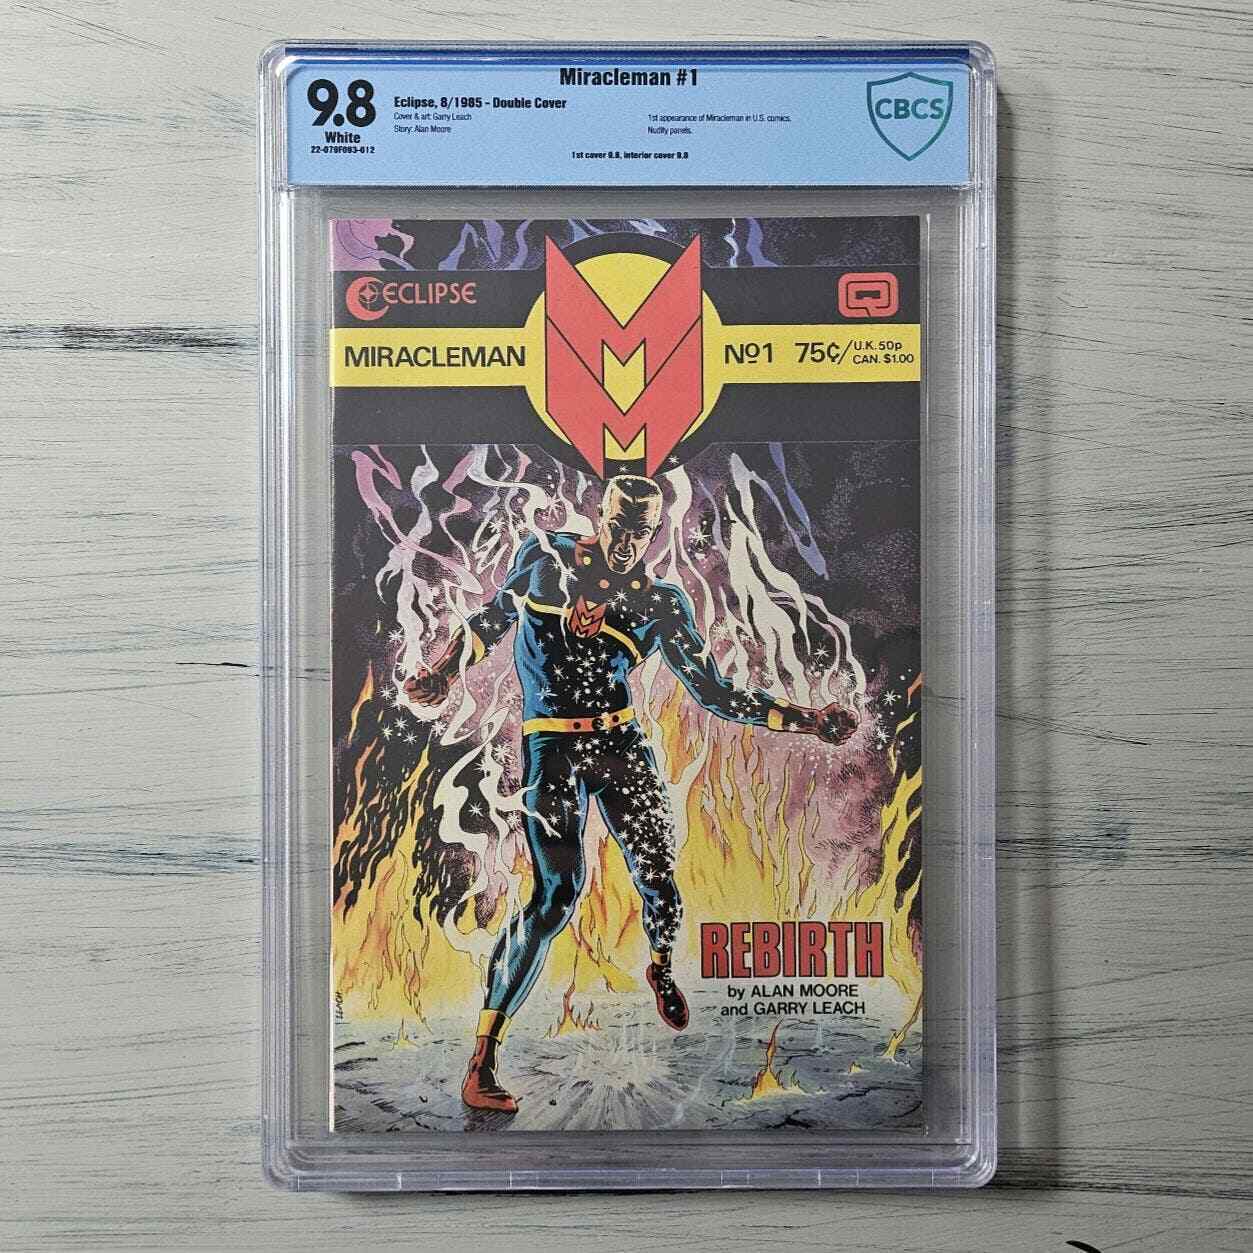 DOUBLE COVER 9.8/9.8 Miracleman #1 CBCS (not CGC) First appearance